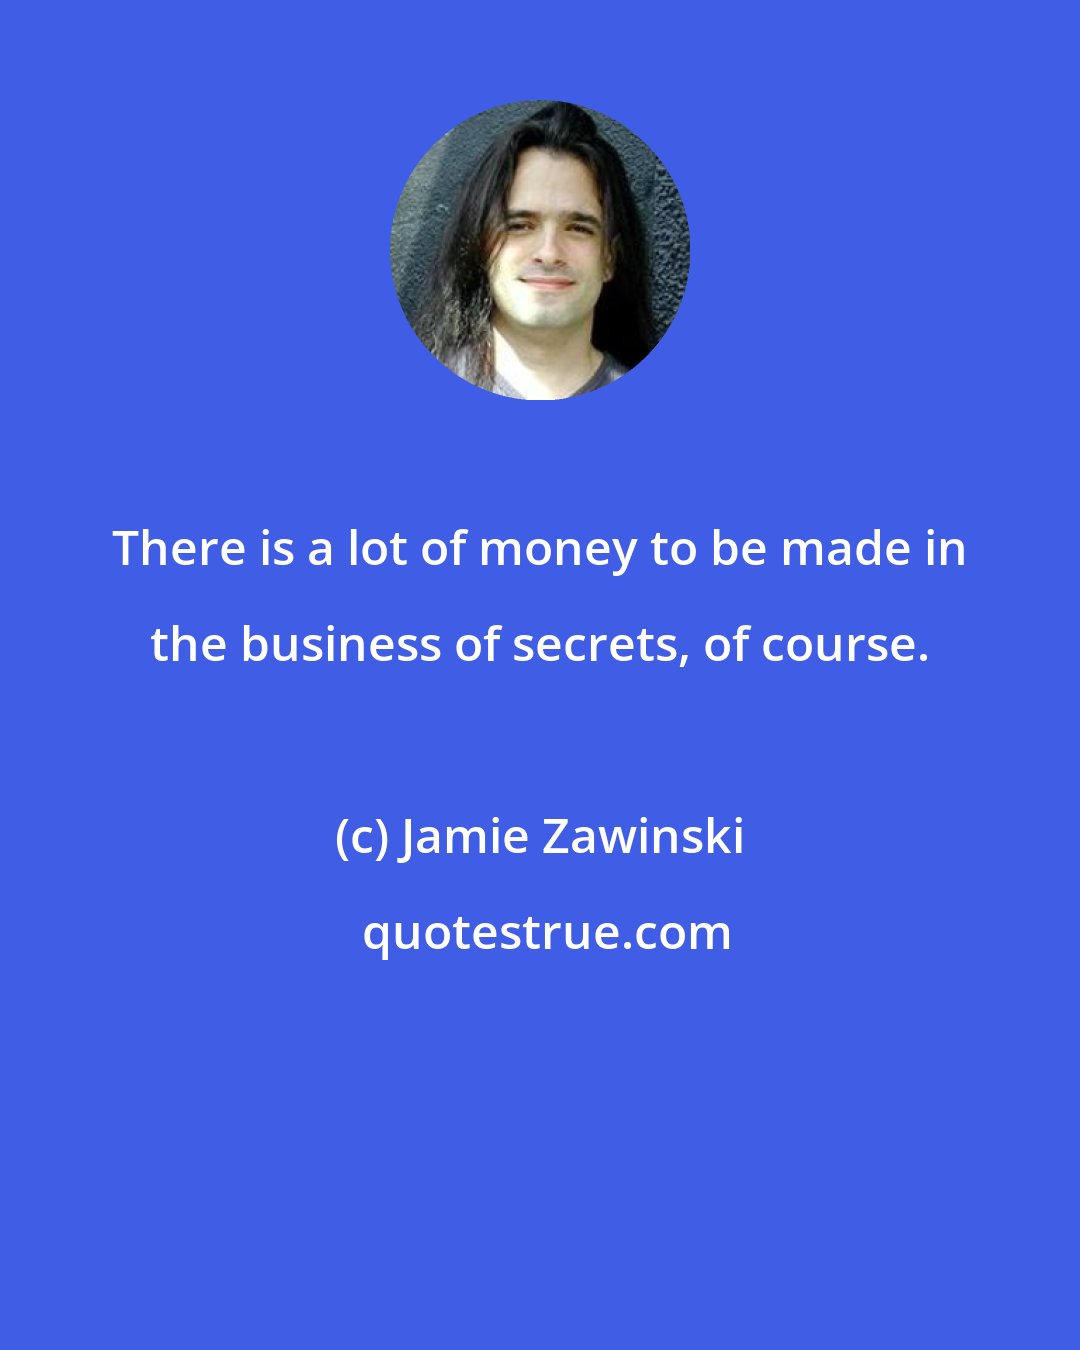 Jamie Zawinski: There is a lot of money to be made in the business of secrets, of course.